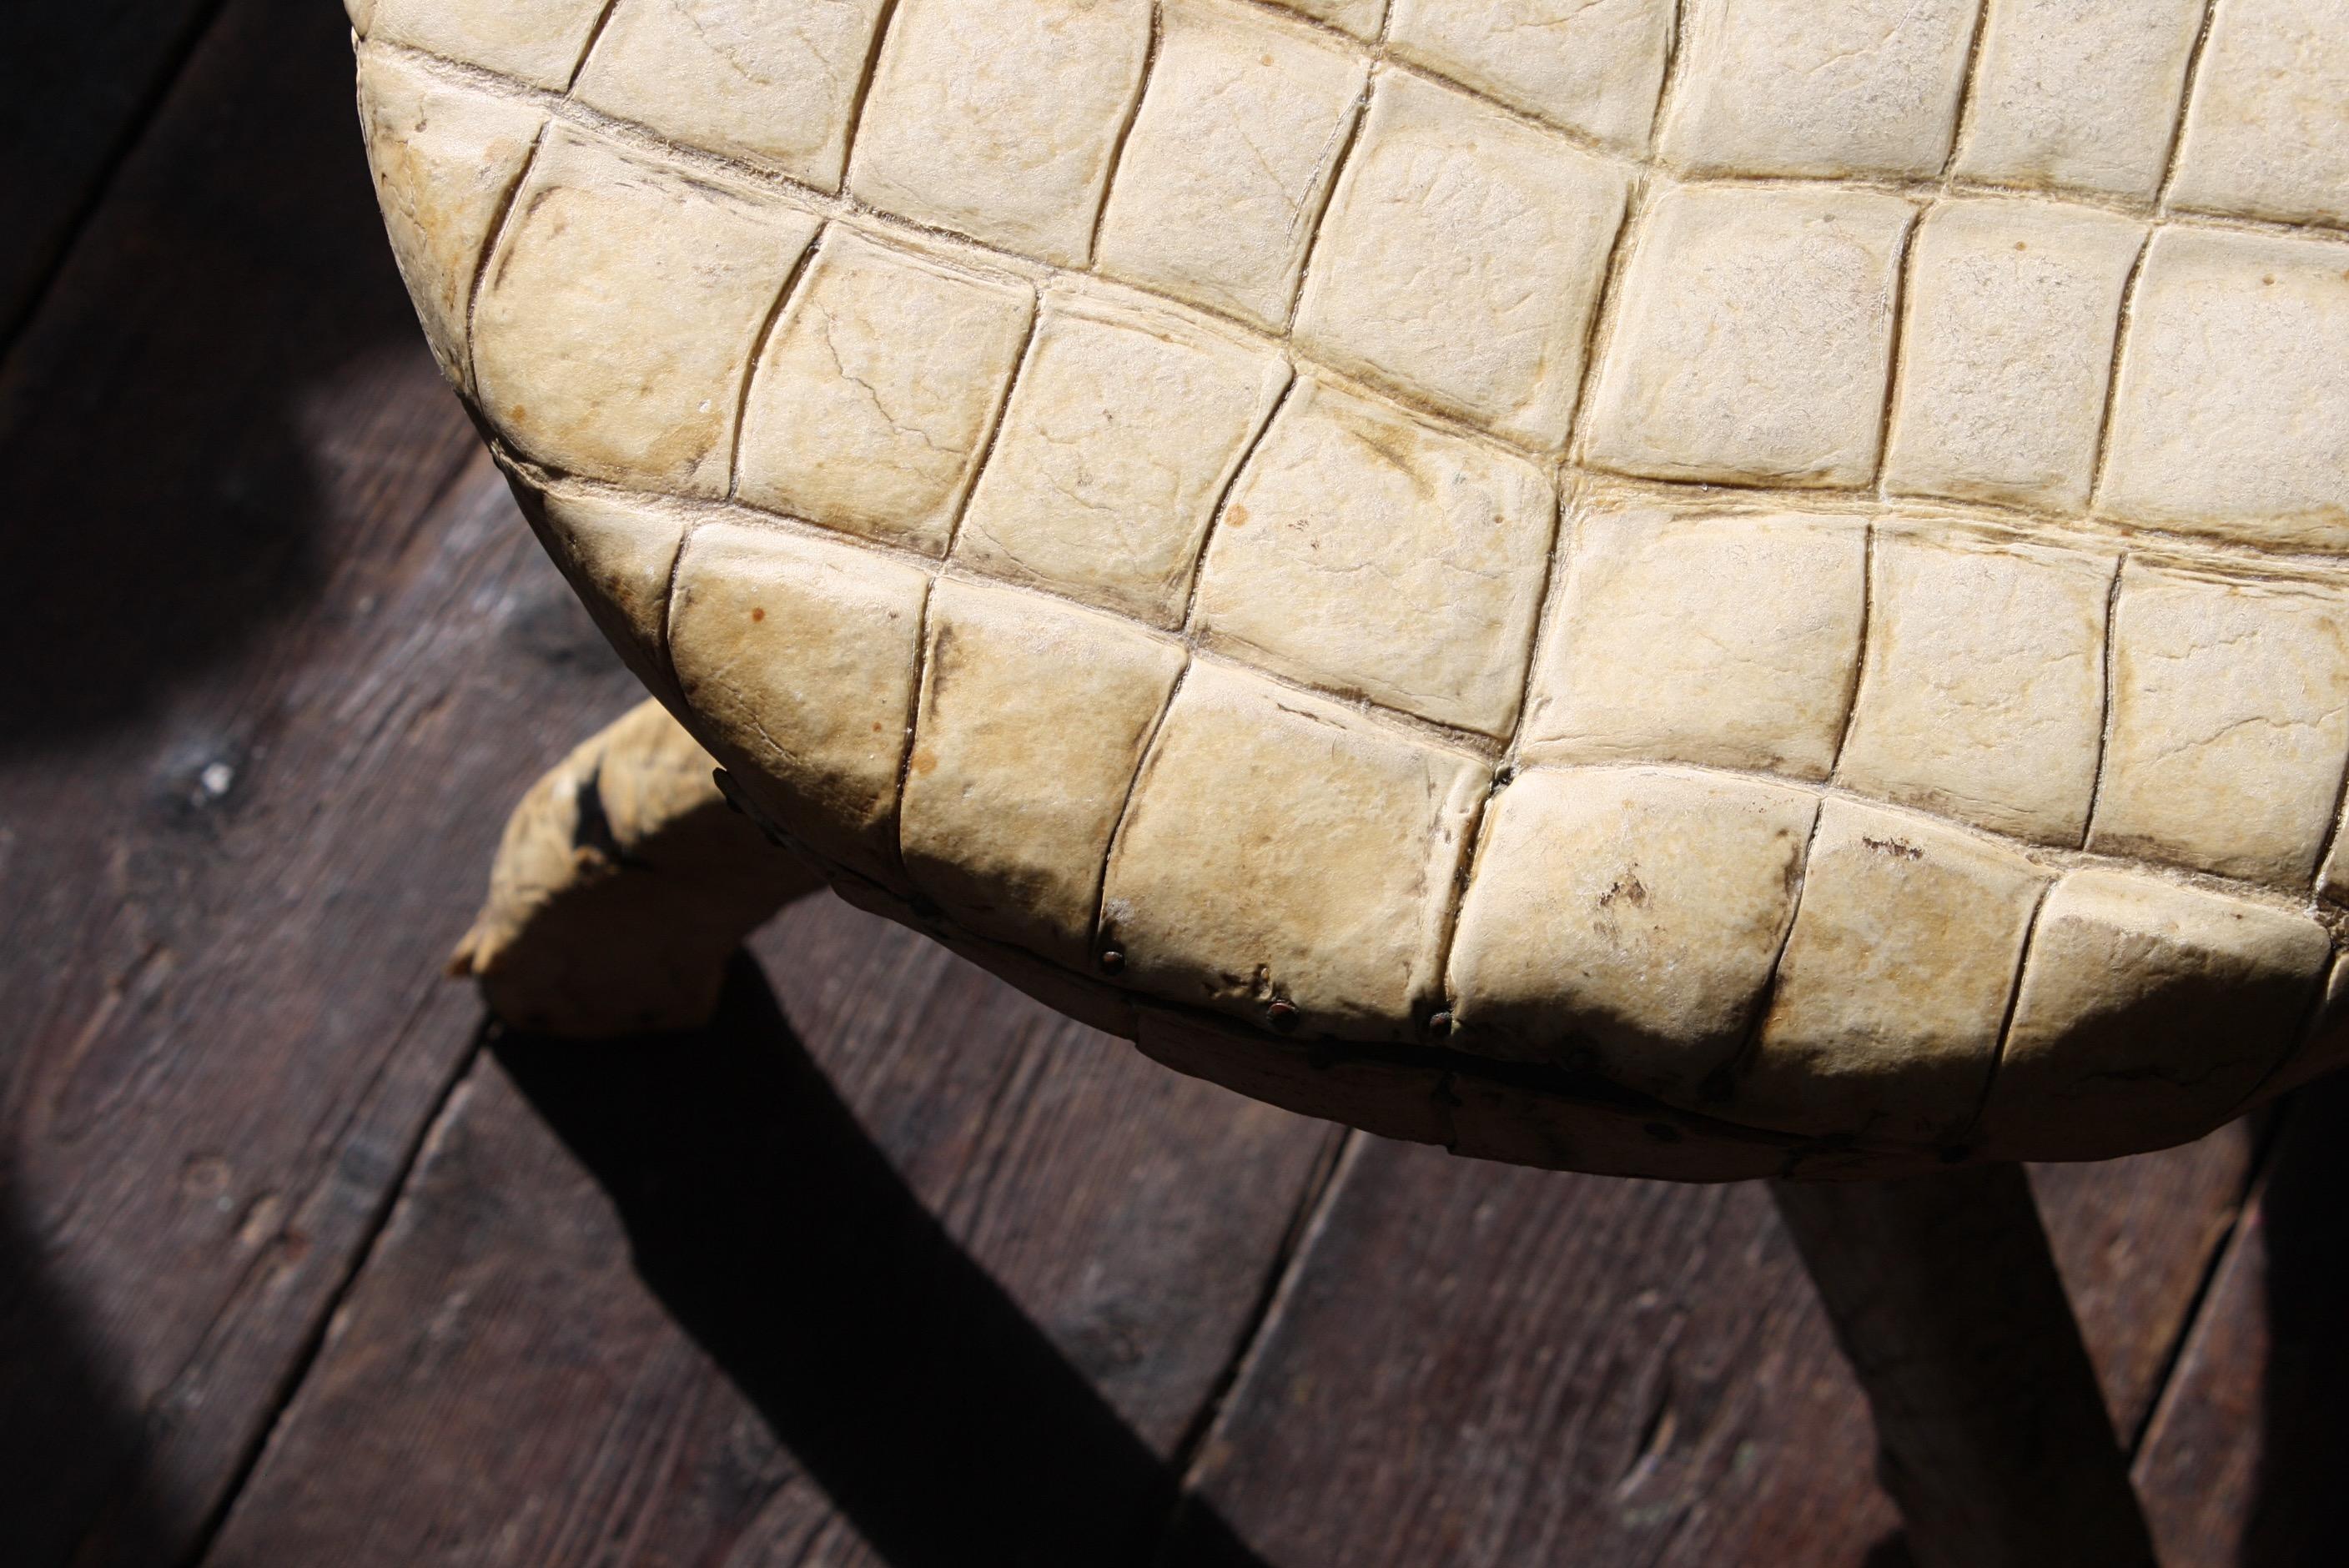 A very unusual adjustable stool, with a simple threaded mechanisms for height adjustment. The stool would appear to be from the early part of the 20th century, and has been completely covered with the belly skin of a crocodile. 

The stool has been